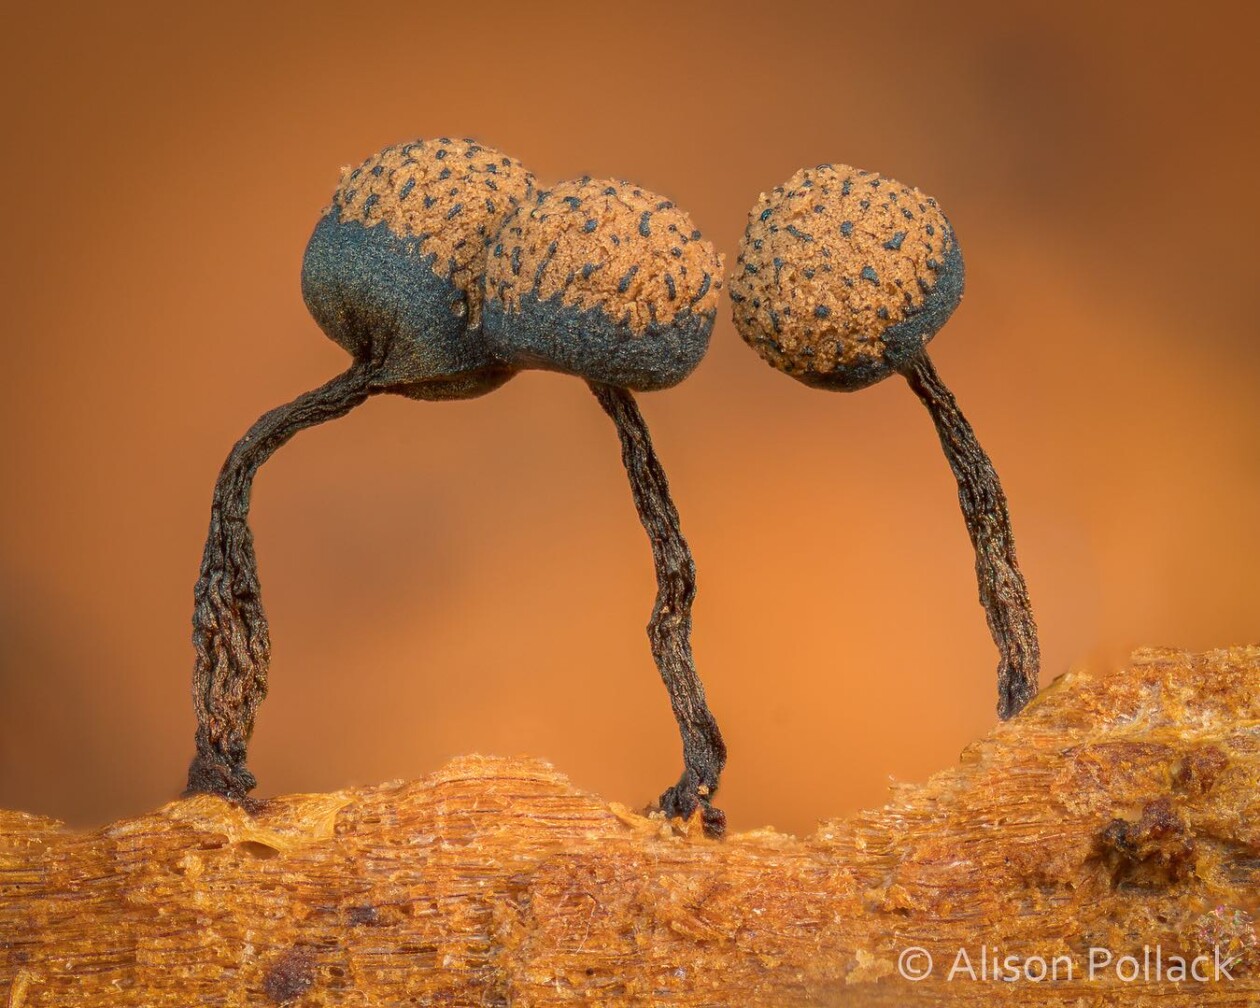 The Microscopic Majesty Of Mushrooms And Molds Captured By Alison Pollack (5)